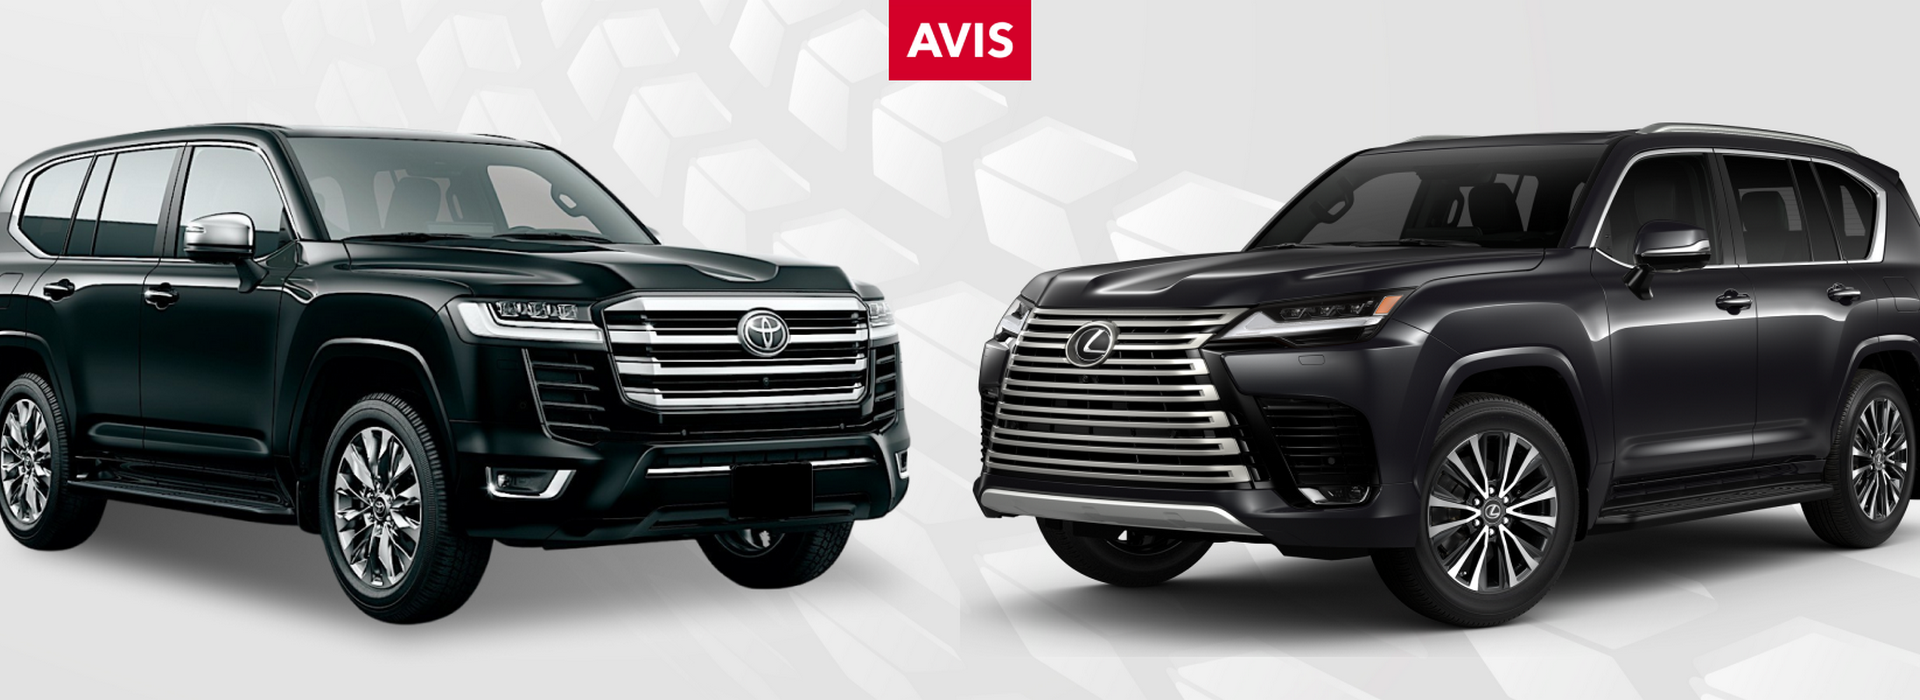 Avis Ukraine Has Opened a New Direction – Premium and Executive-Class Armored Car Rental